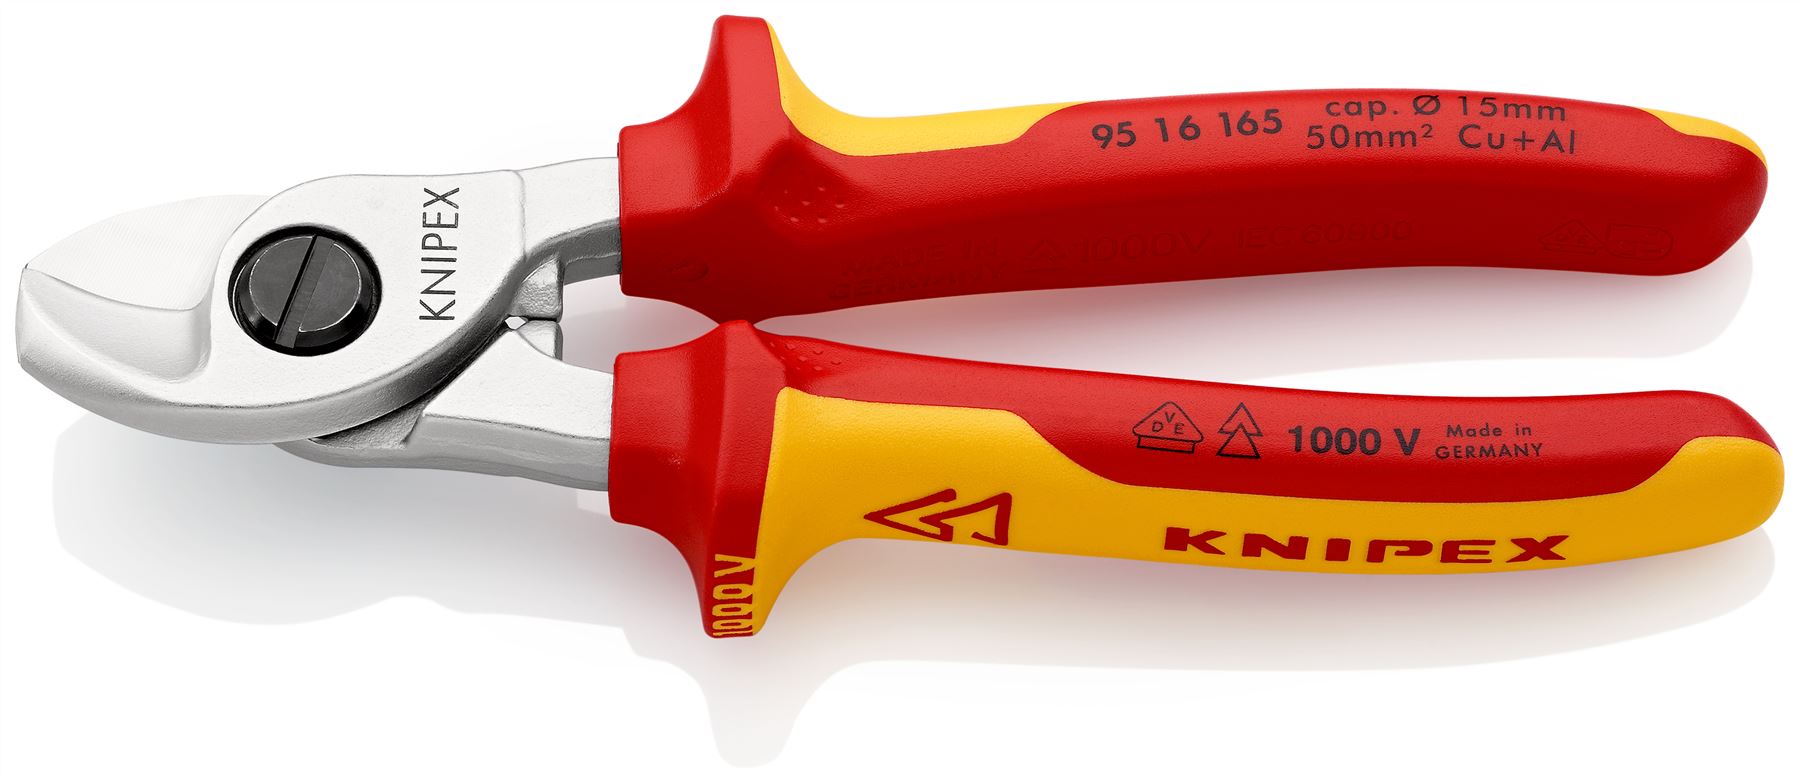 KNIPEX Cable Shears Cutting Pliers Cuts Cable up to 15mm Diameter 165mm VDE Insulated Multi Component Grips 95 16 165